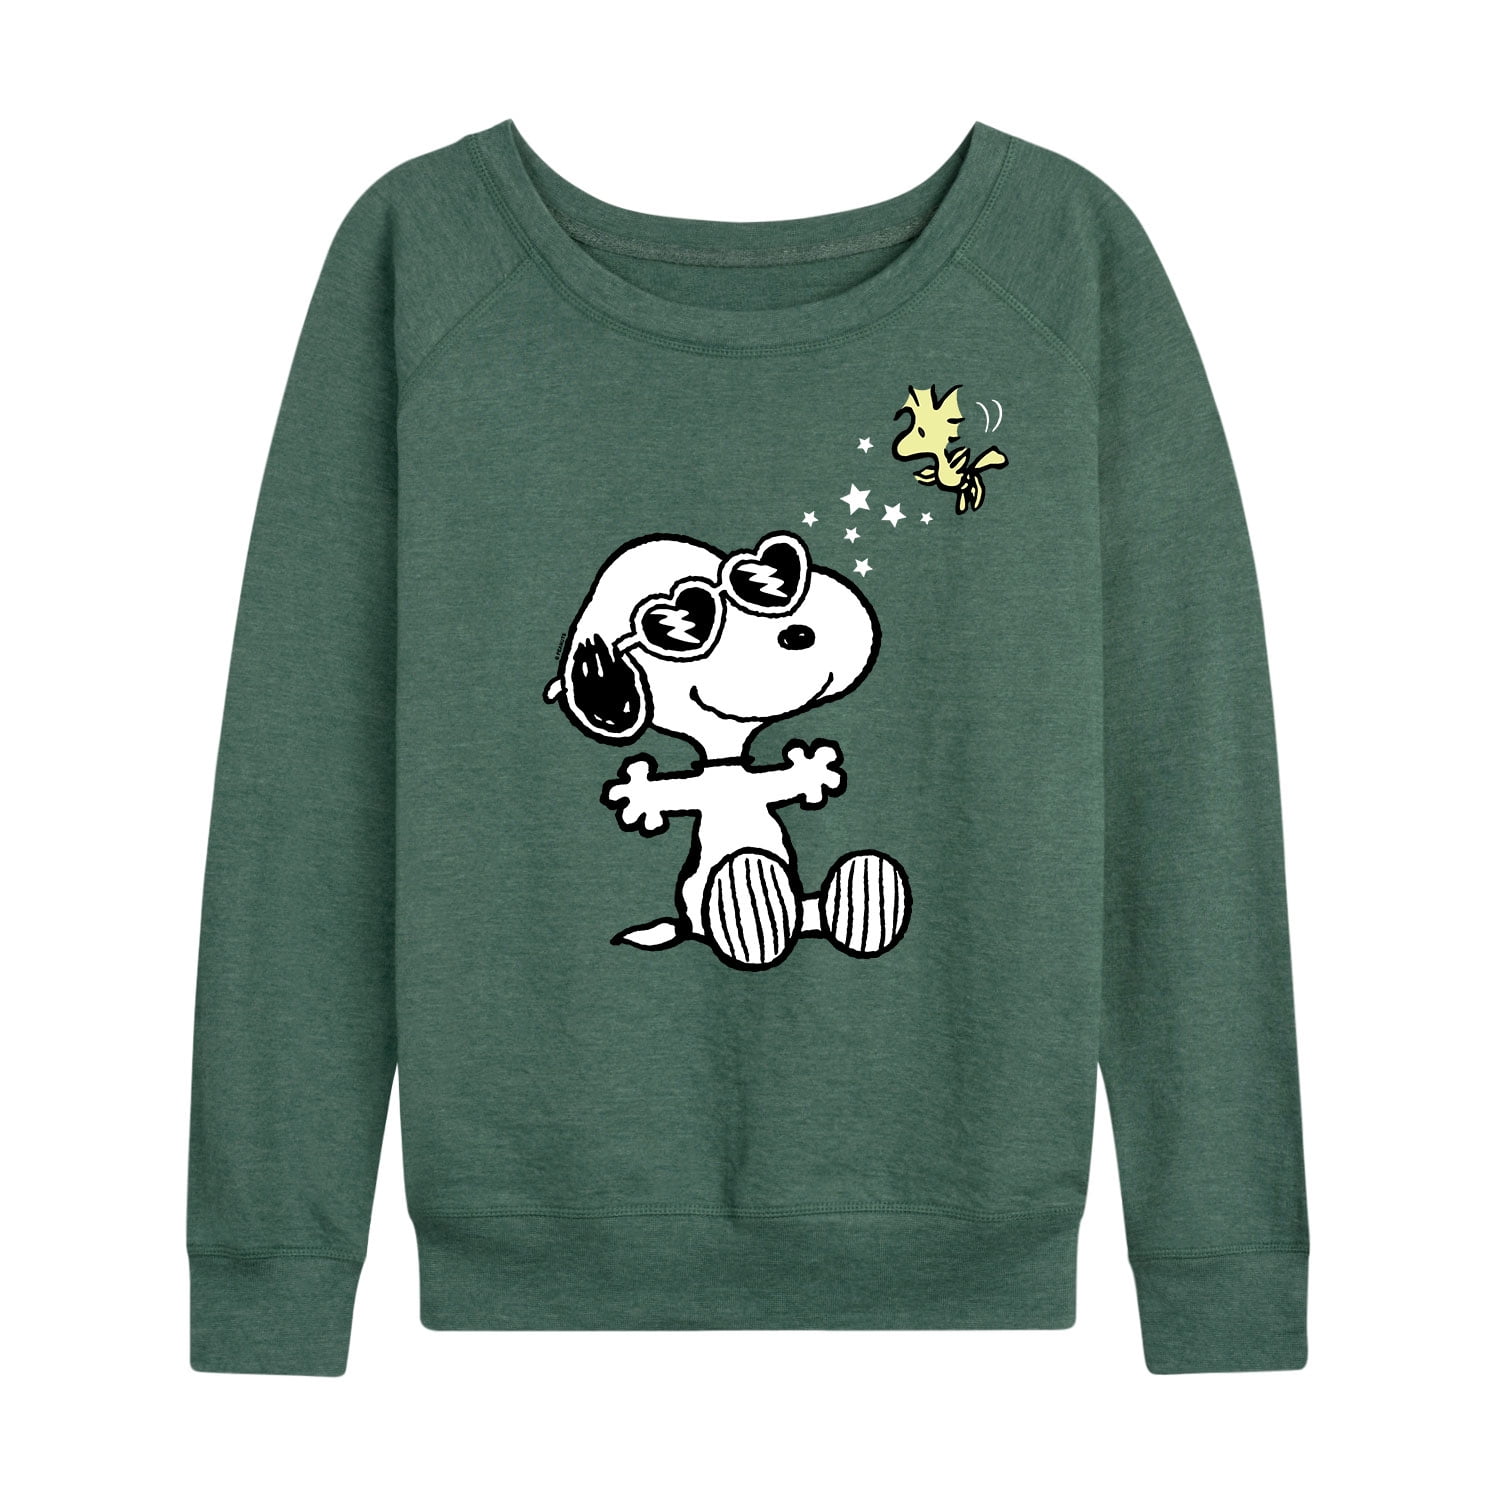 Peanuts - Faces of Snoopy -Women's Lightweight French Terry Pullover ...